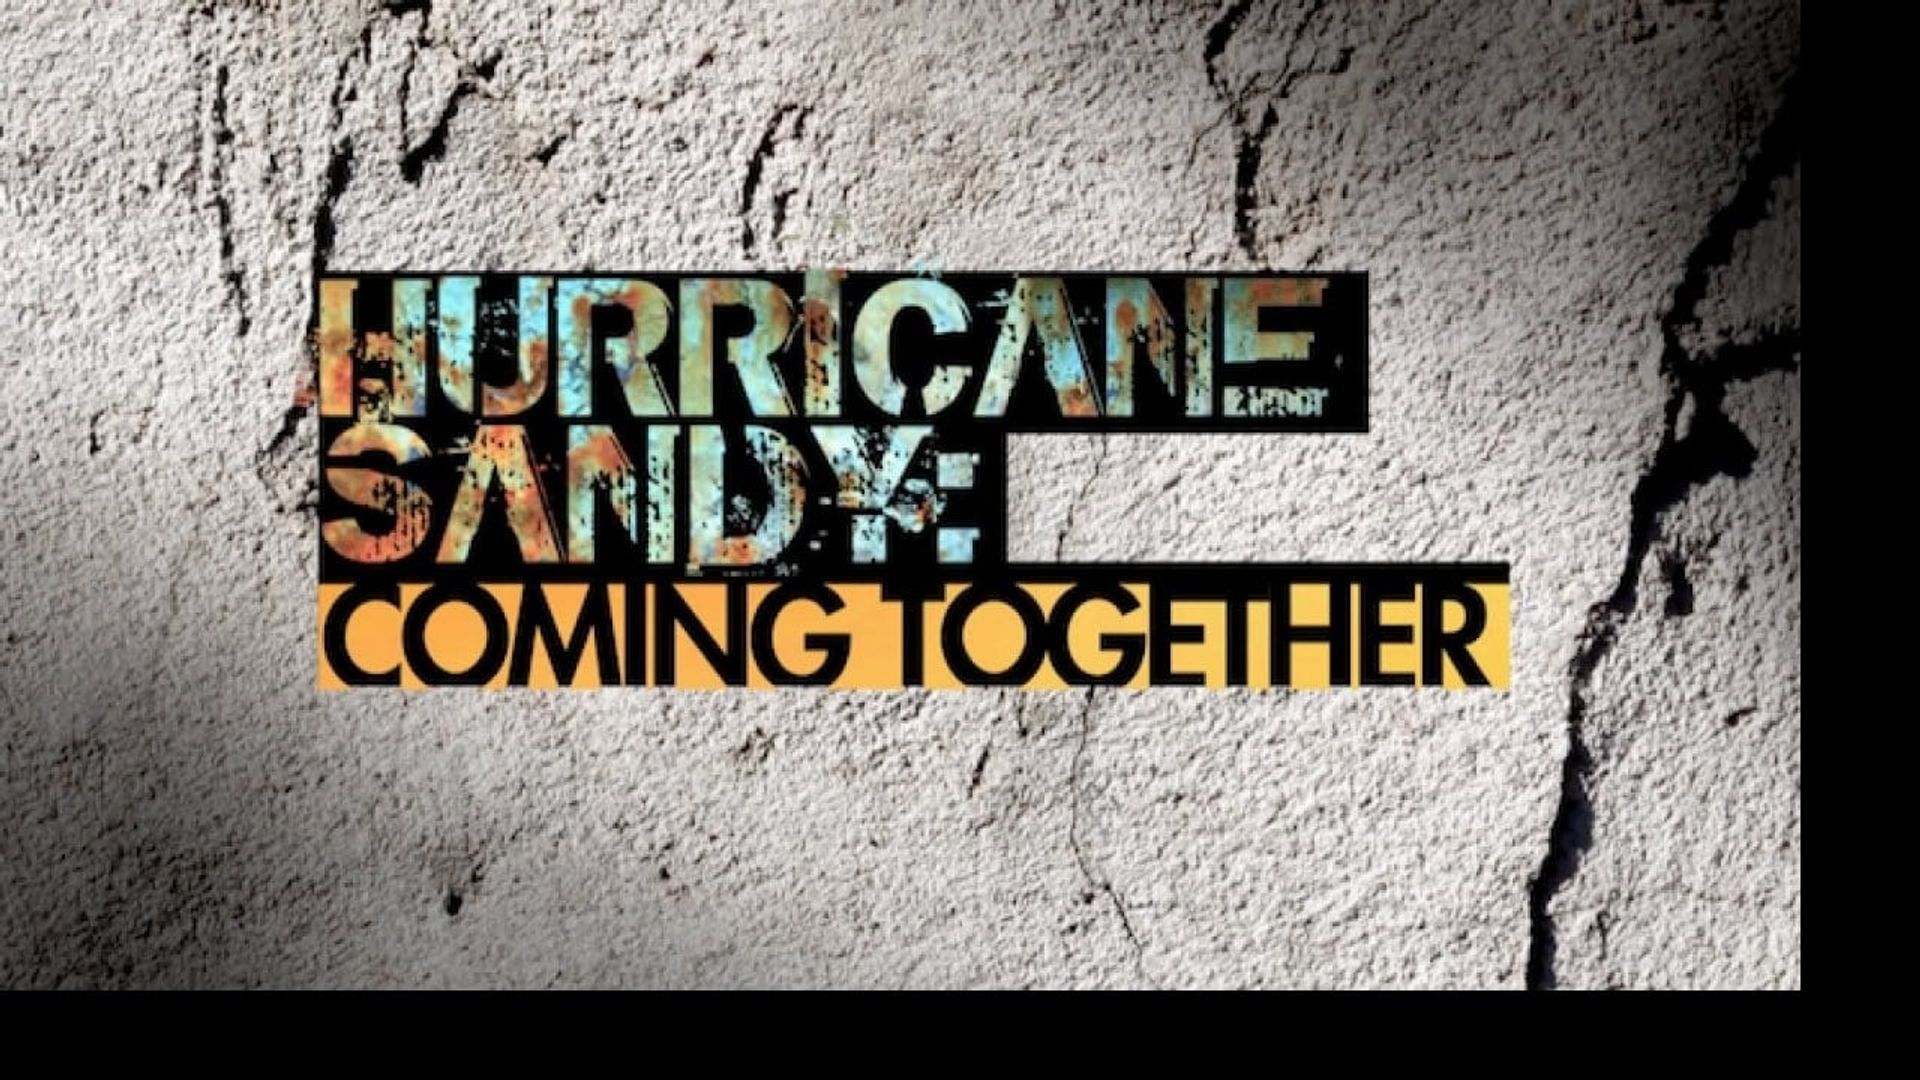 Hurricane Sandy: Coming Together background